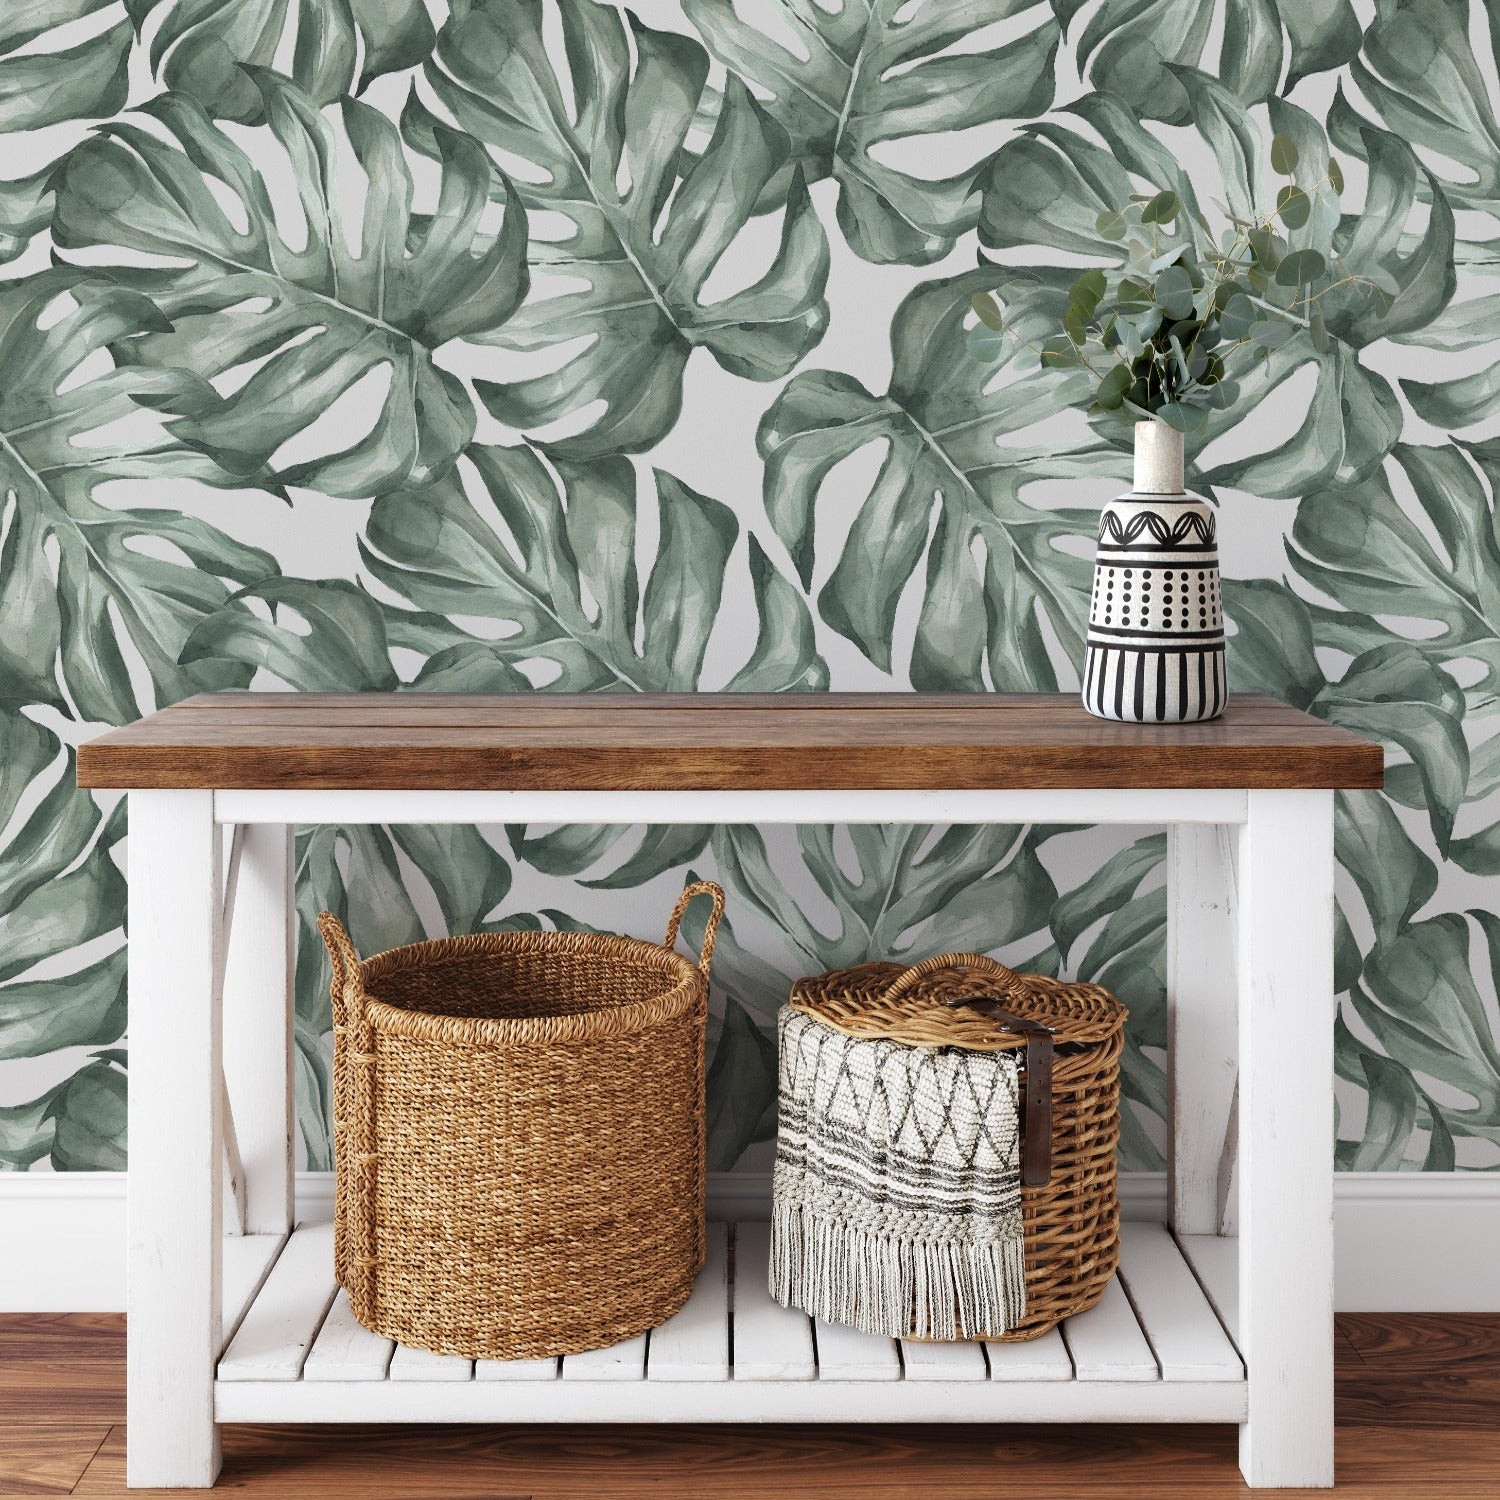 A stylish interior setting displaying the Modern Monstera Wallpaper as a feature wall behind a cozy white chair, accented by a striking black-and-white striped vase with greenery, evoking a modern jungle feel in the decor.